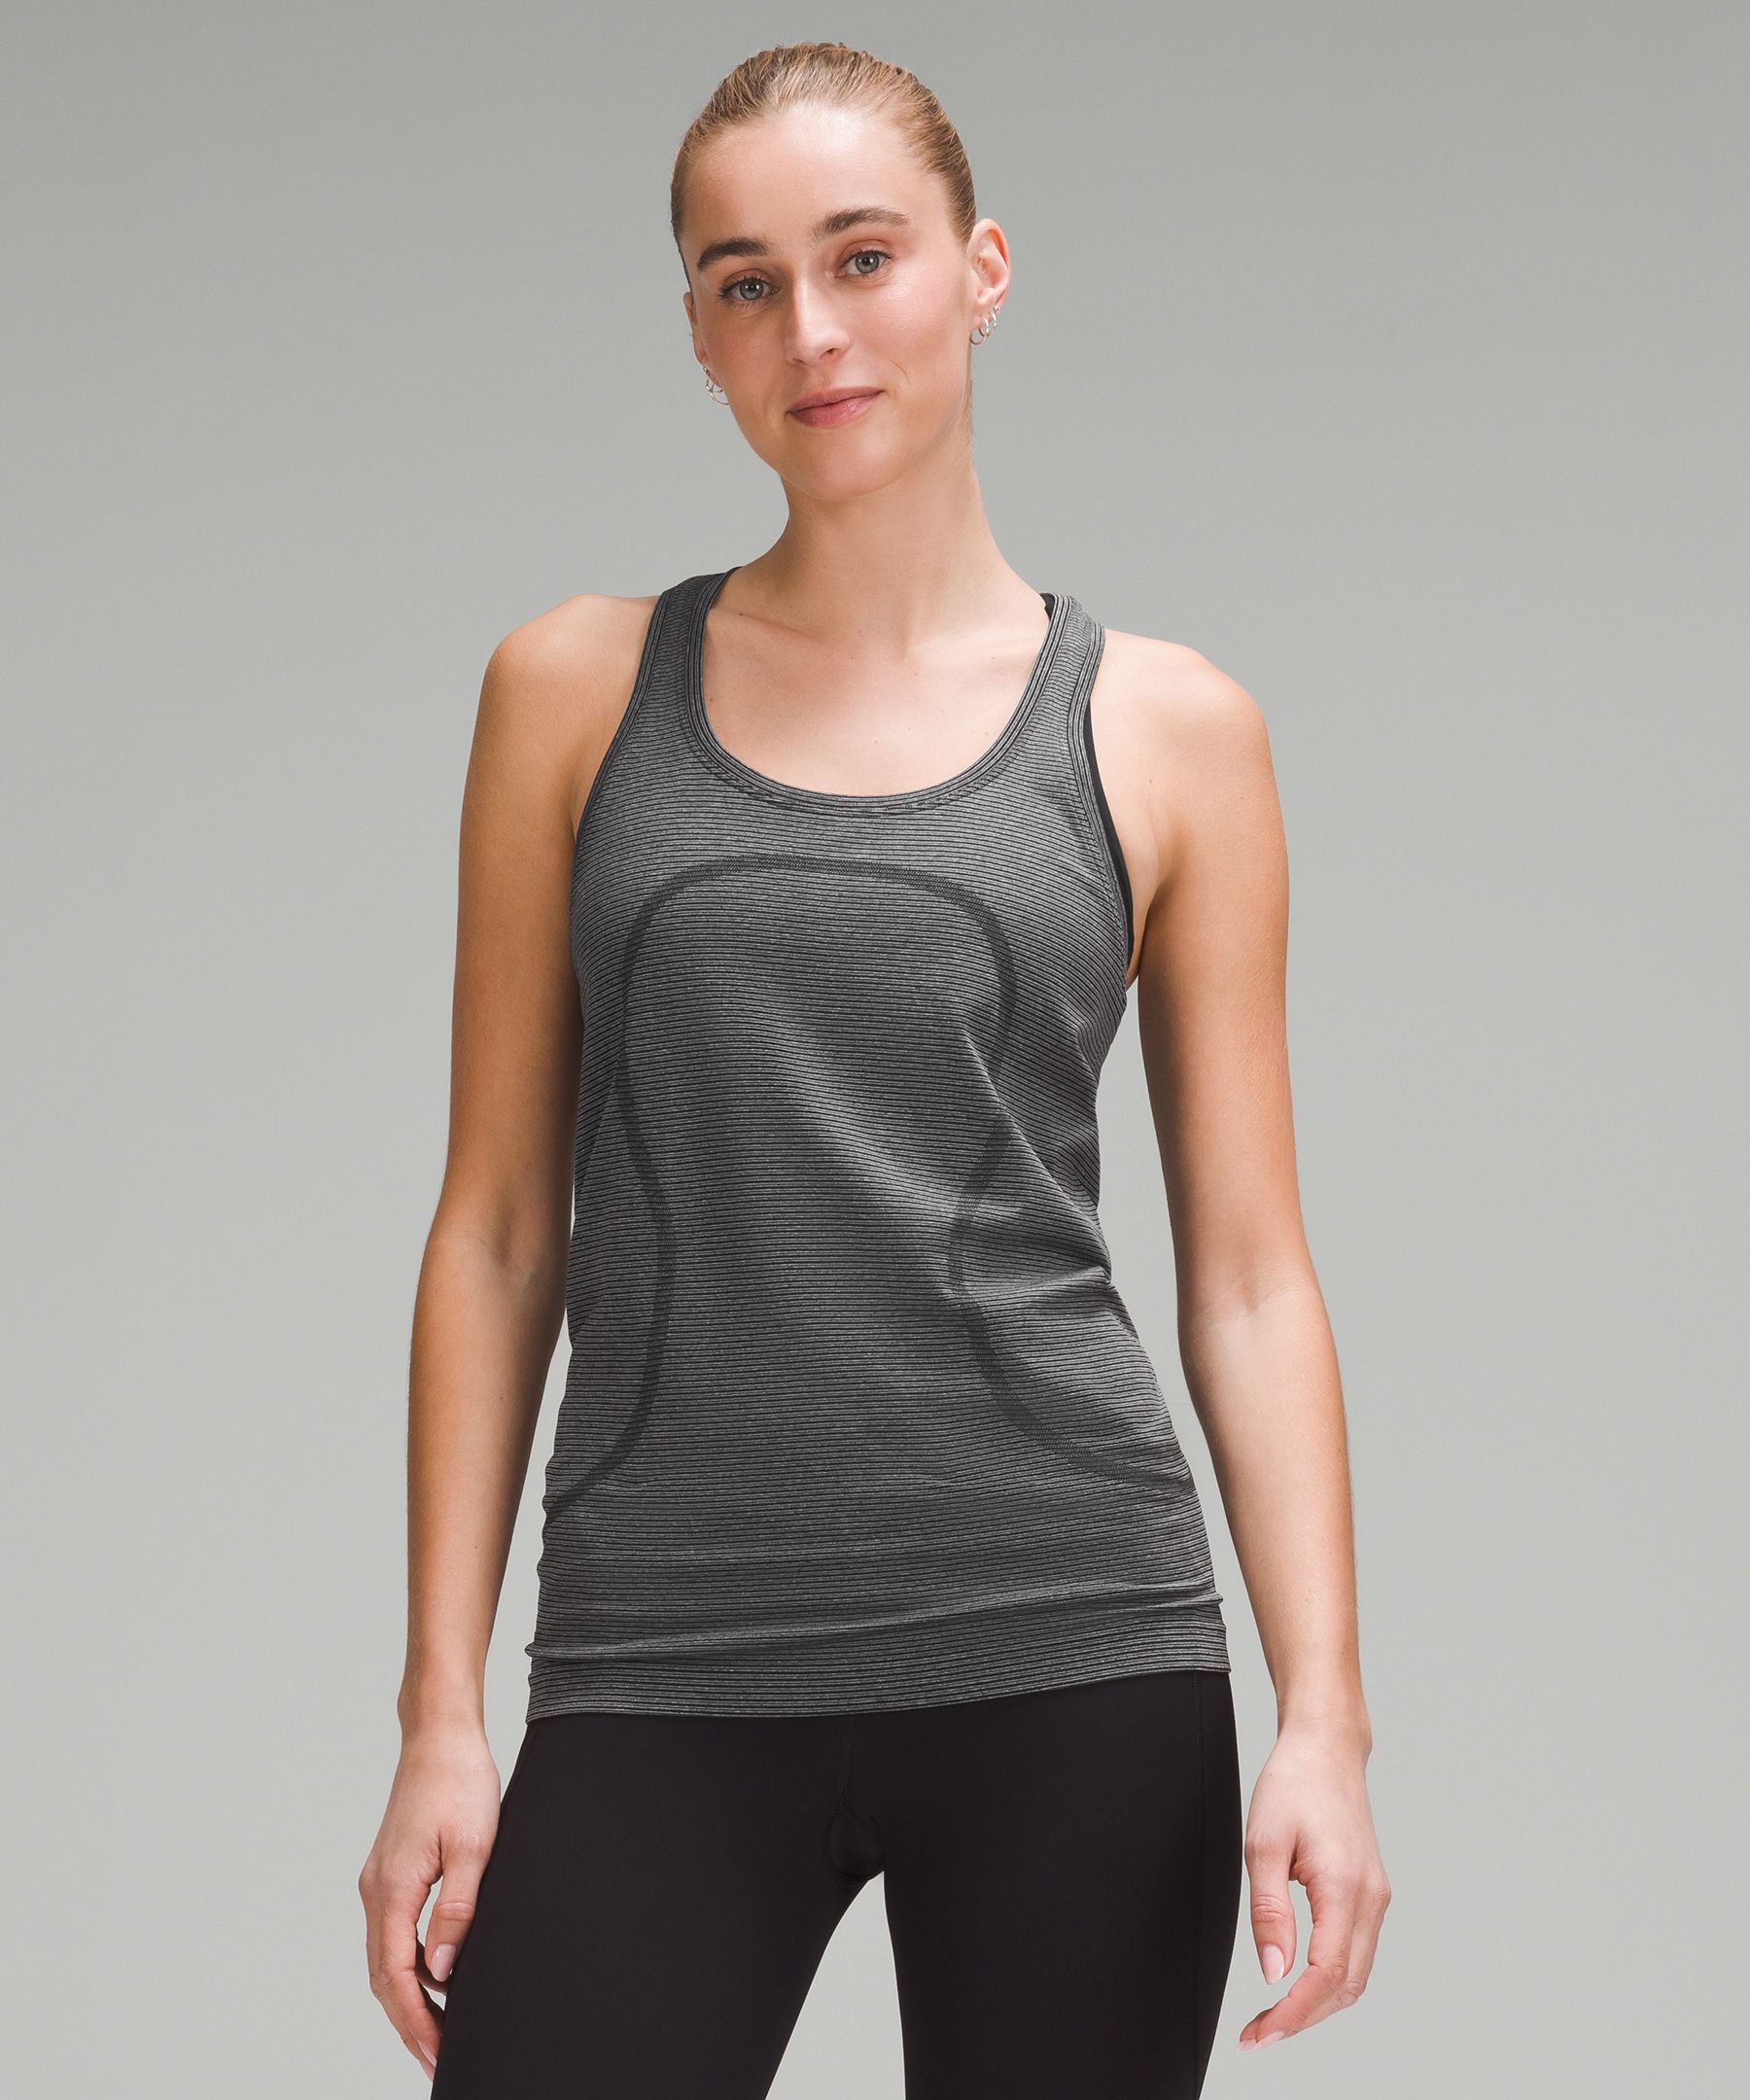 lululemon - The Deep V Tank - supportive for the bust and body skimming for  the curves.  .com/products/clothes-accessories/theyre-back/Deep-V-Tank-72873?cid=fbtheyreback  Why We Made This: Our classic crossfront with moderate support